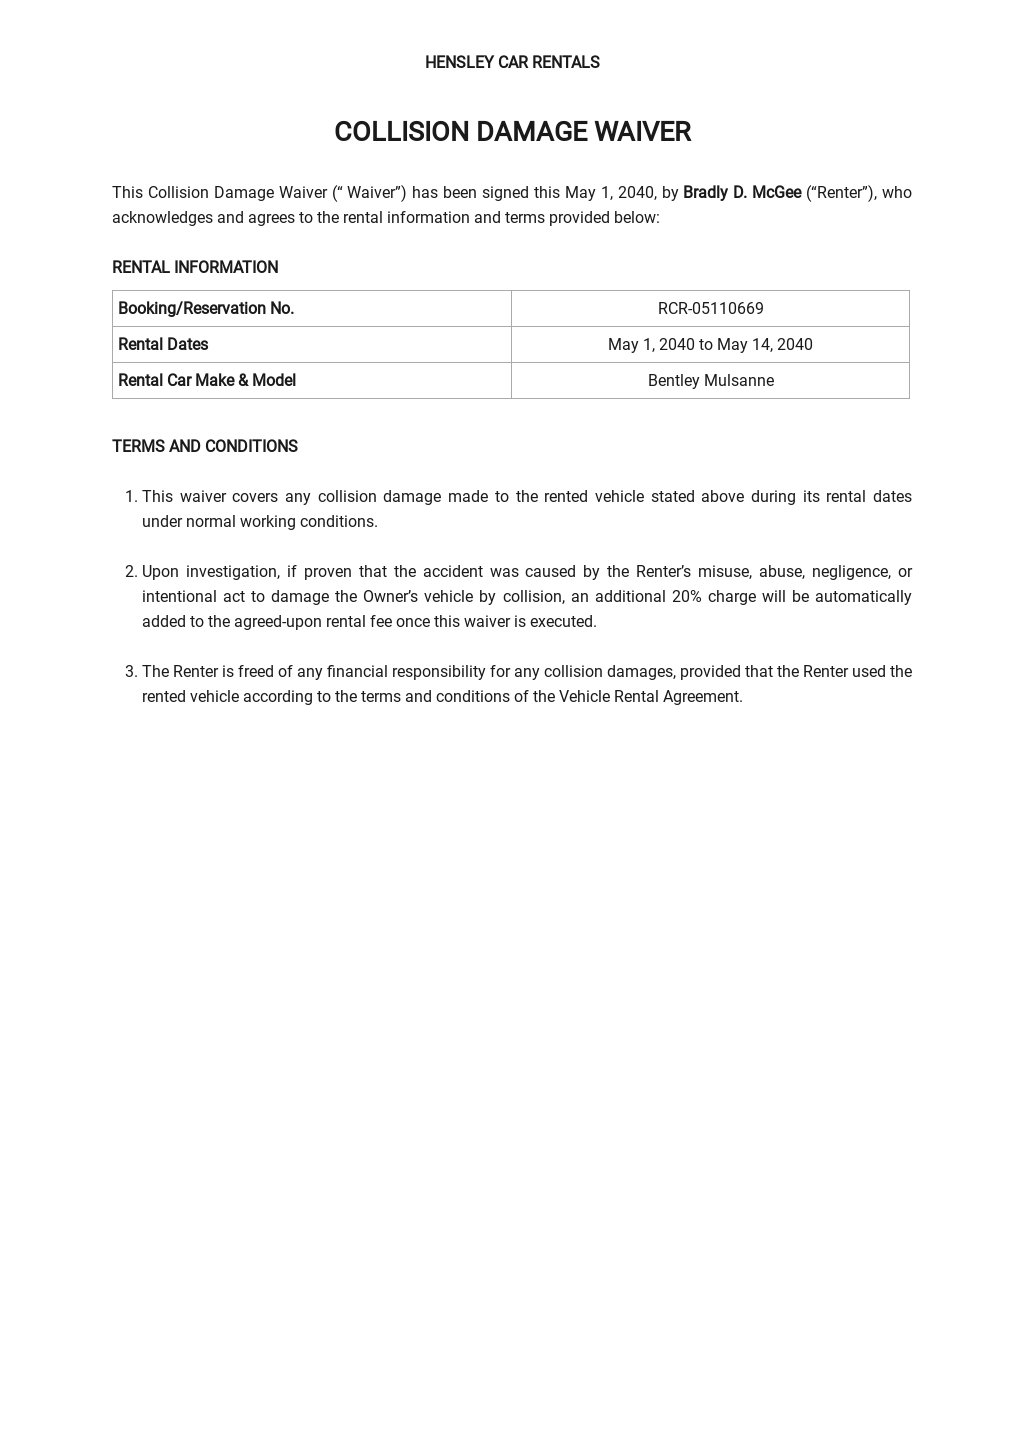 Collision Damage Waiver Template.jpe